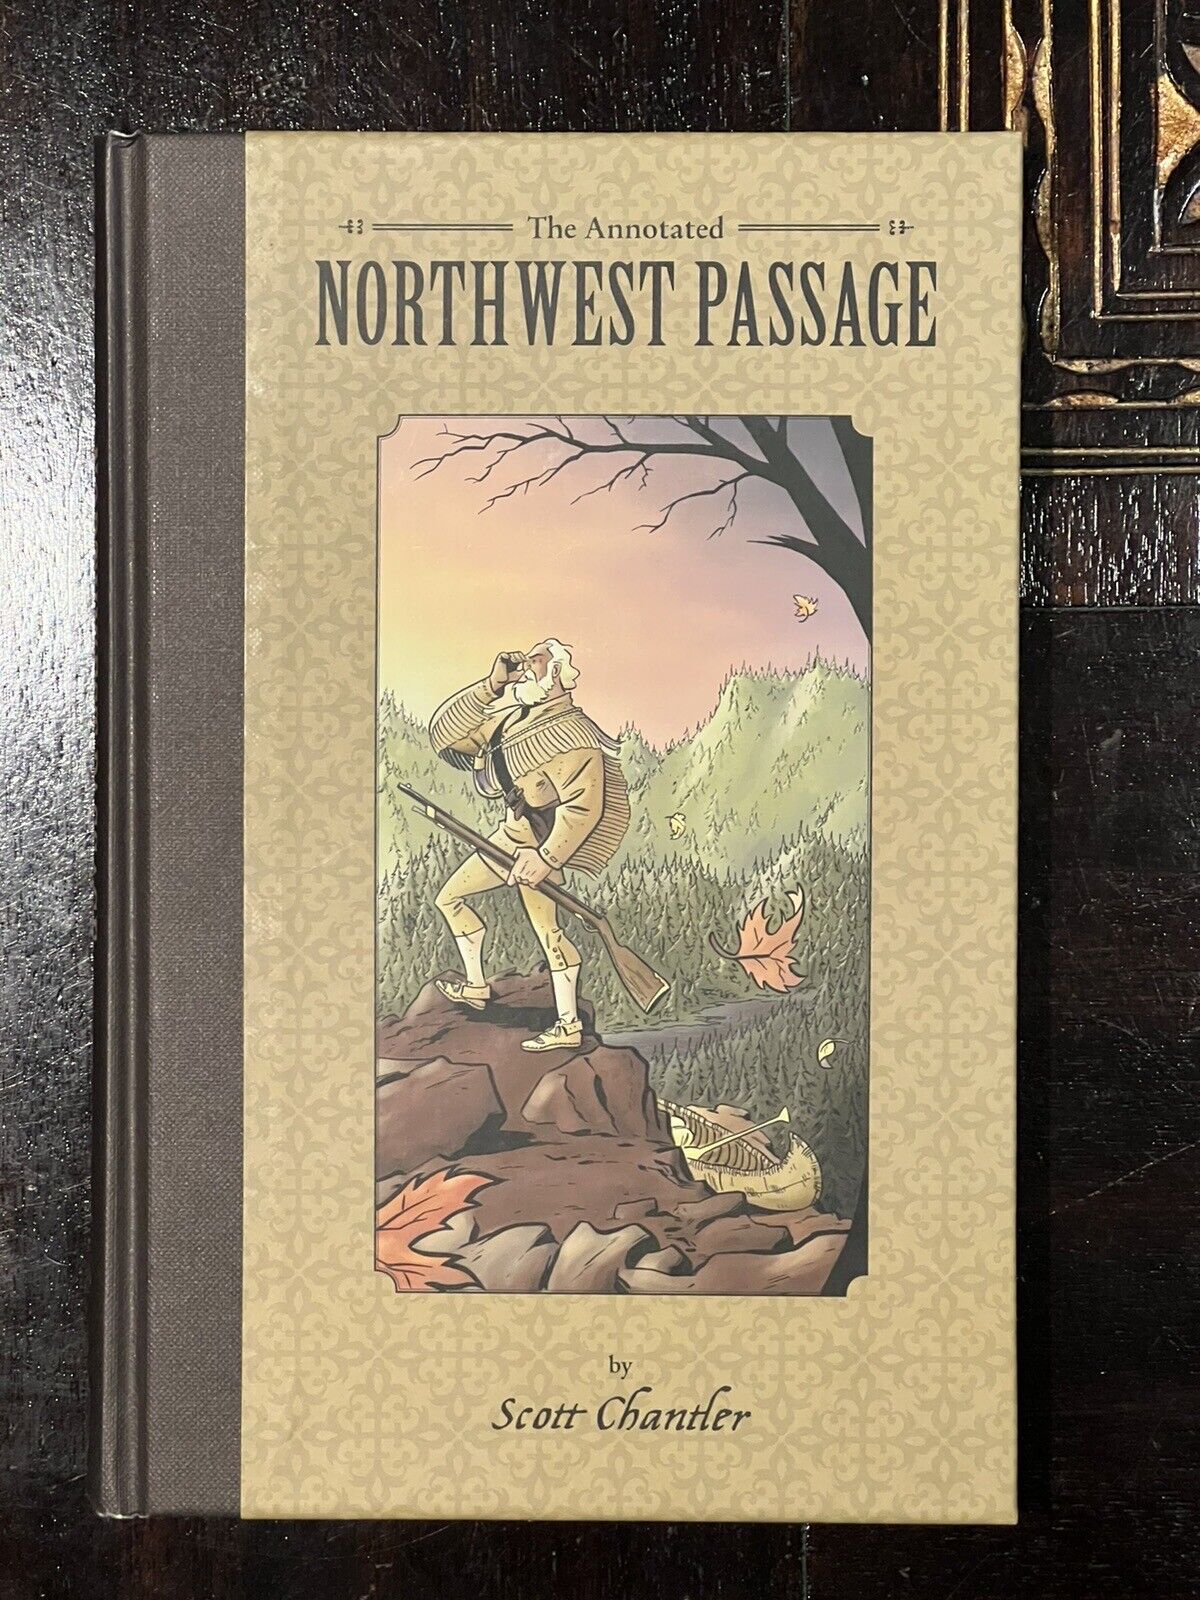 NORTHWEST PASSAGE, The Annotated HC signed by Scott Chantler